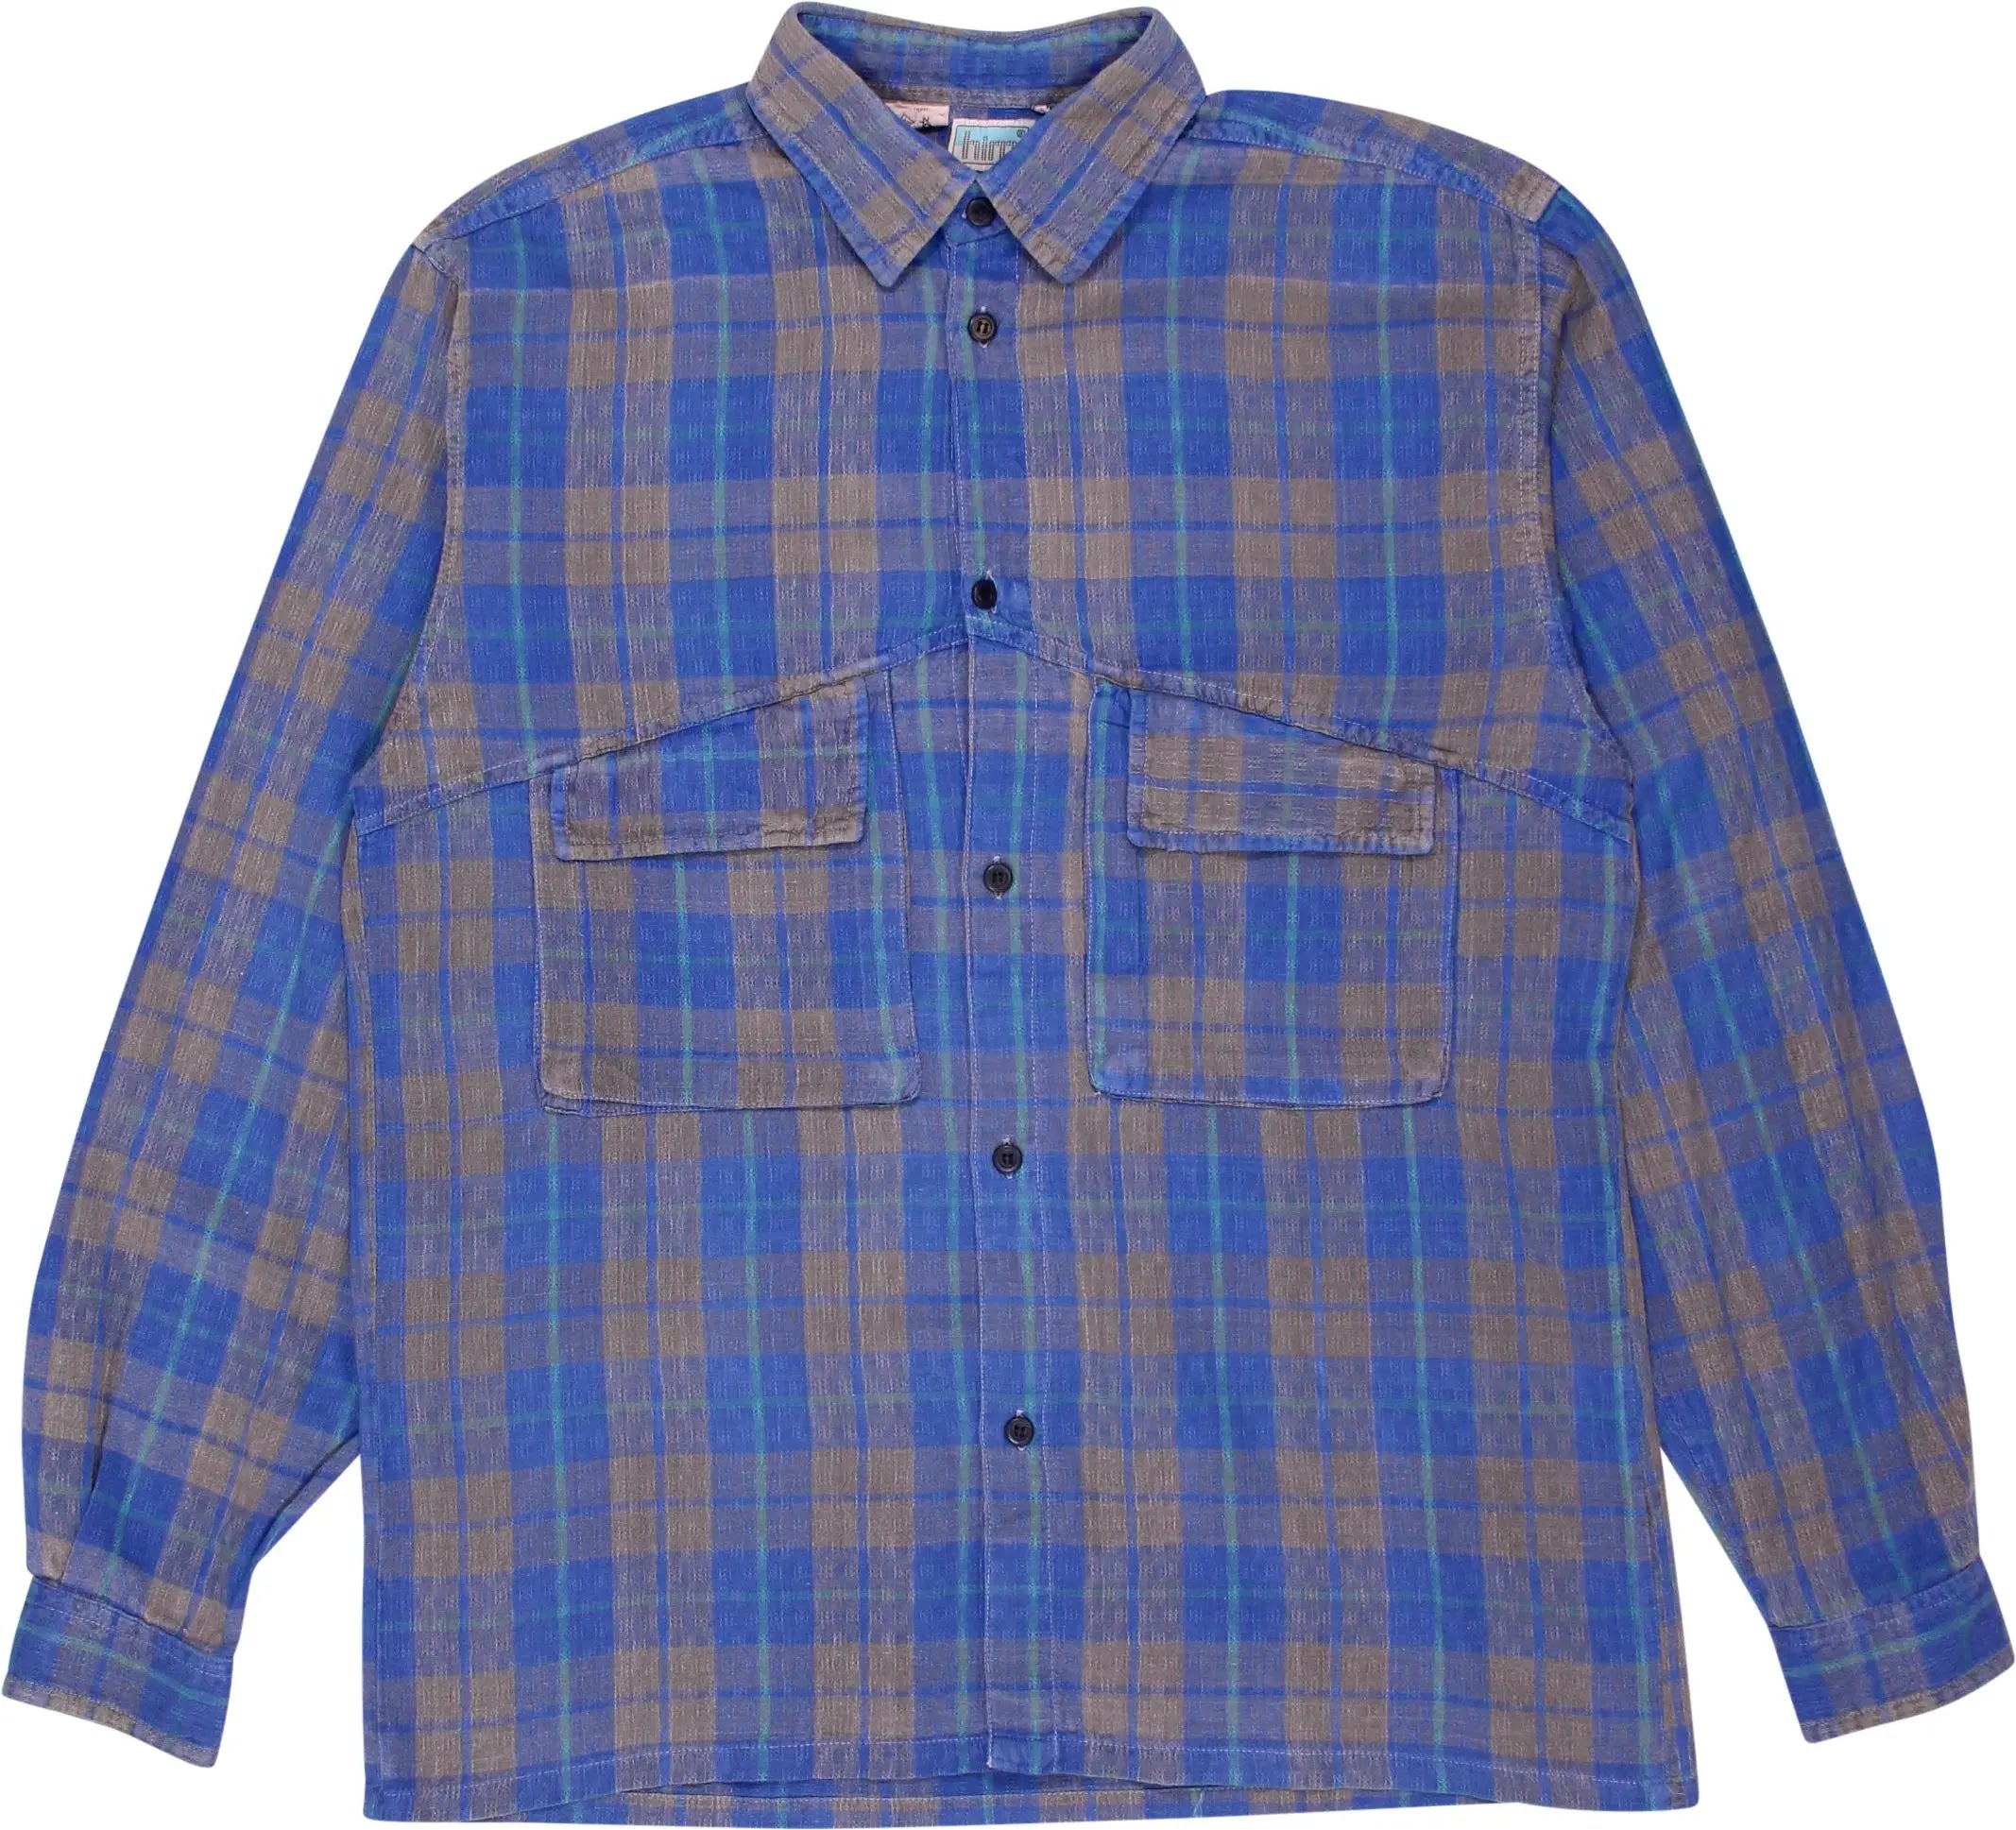 Him - 90s Checked Cotton Shirt- ThriftTale.com - Vintage and second handclothing